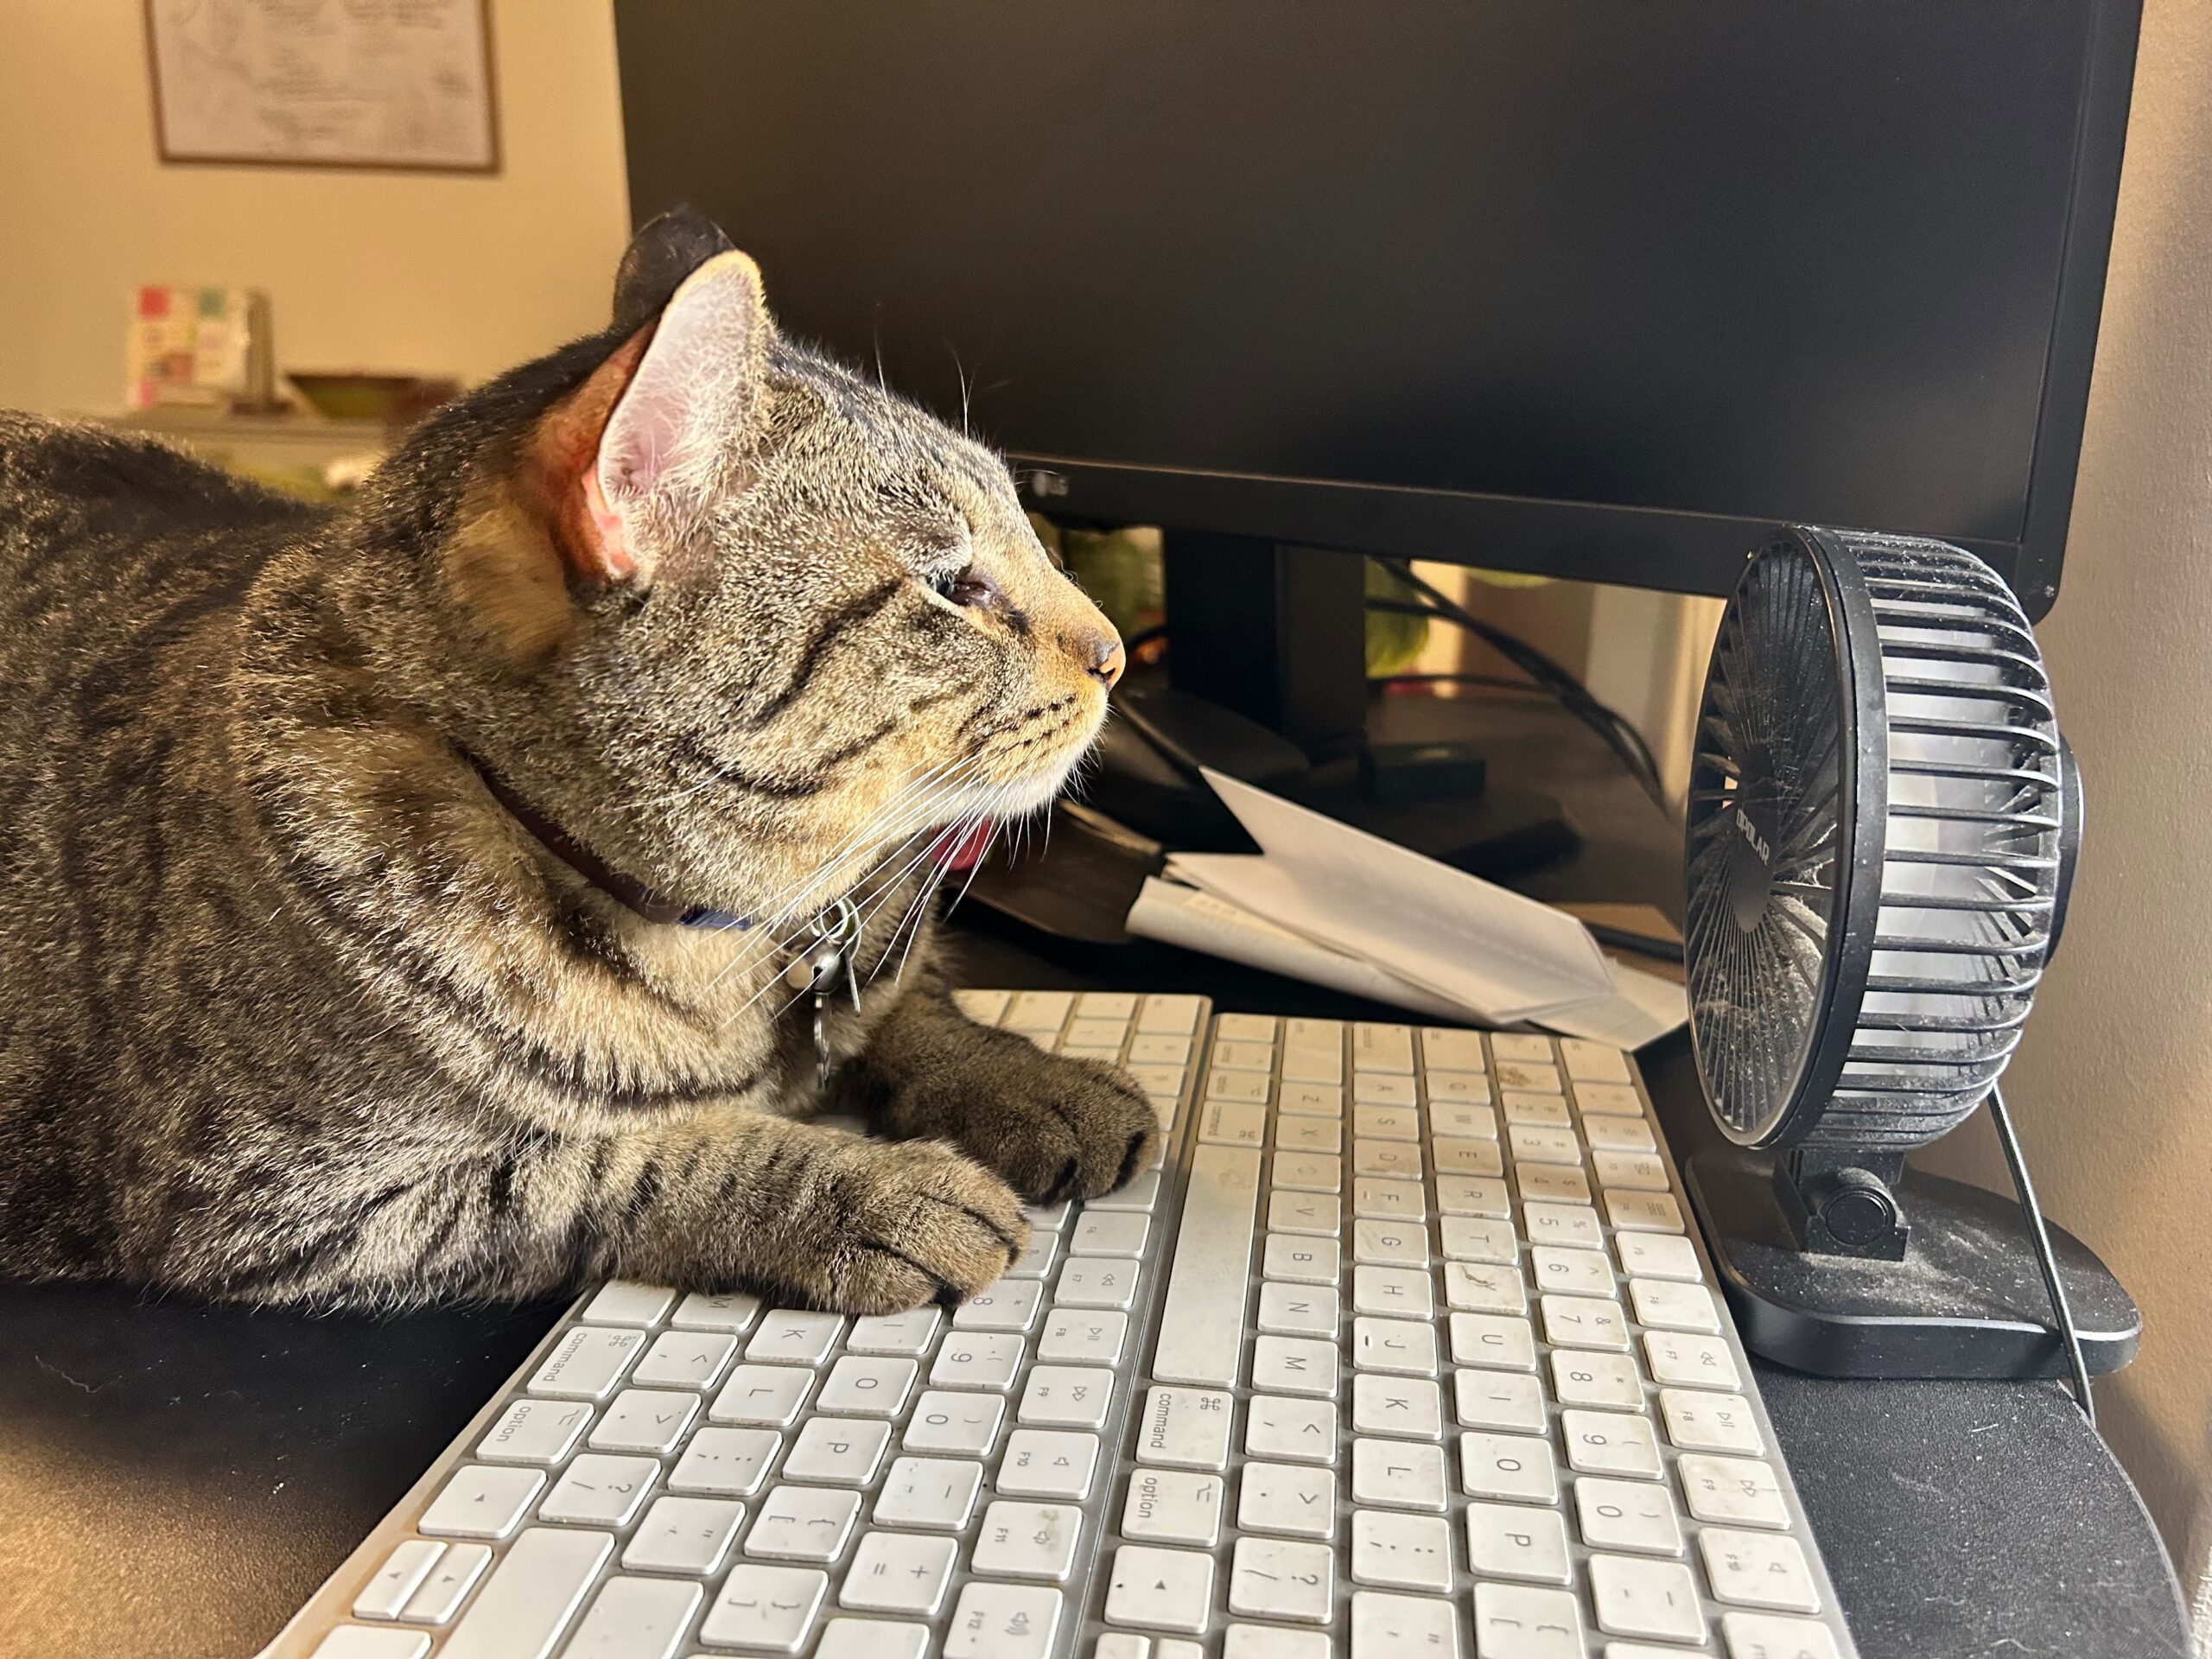 A brown tabby cat with paws on a keyboard, facing a small desk fan with eyes closed. A black monitor sits on the desk behind the cat.